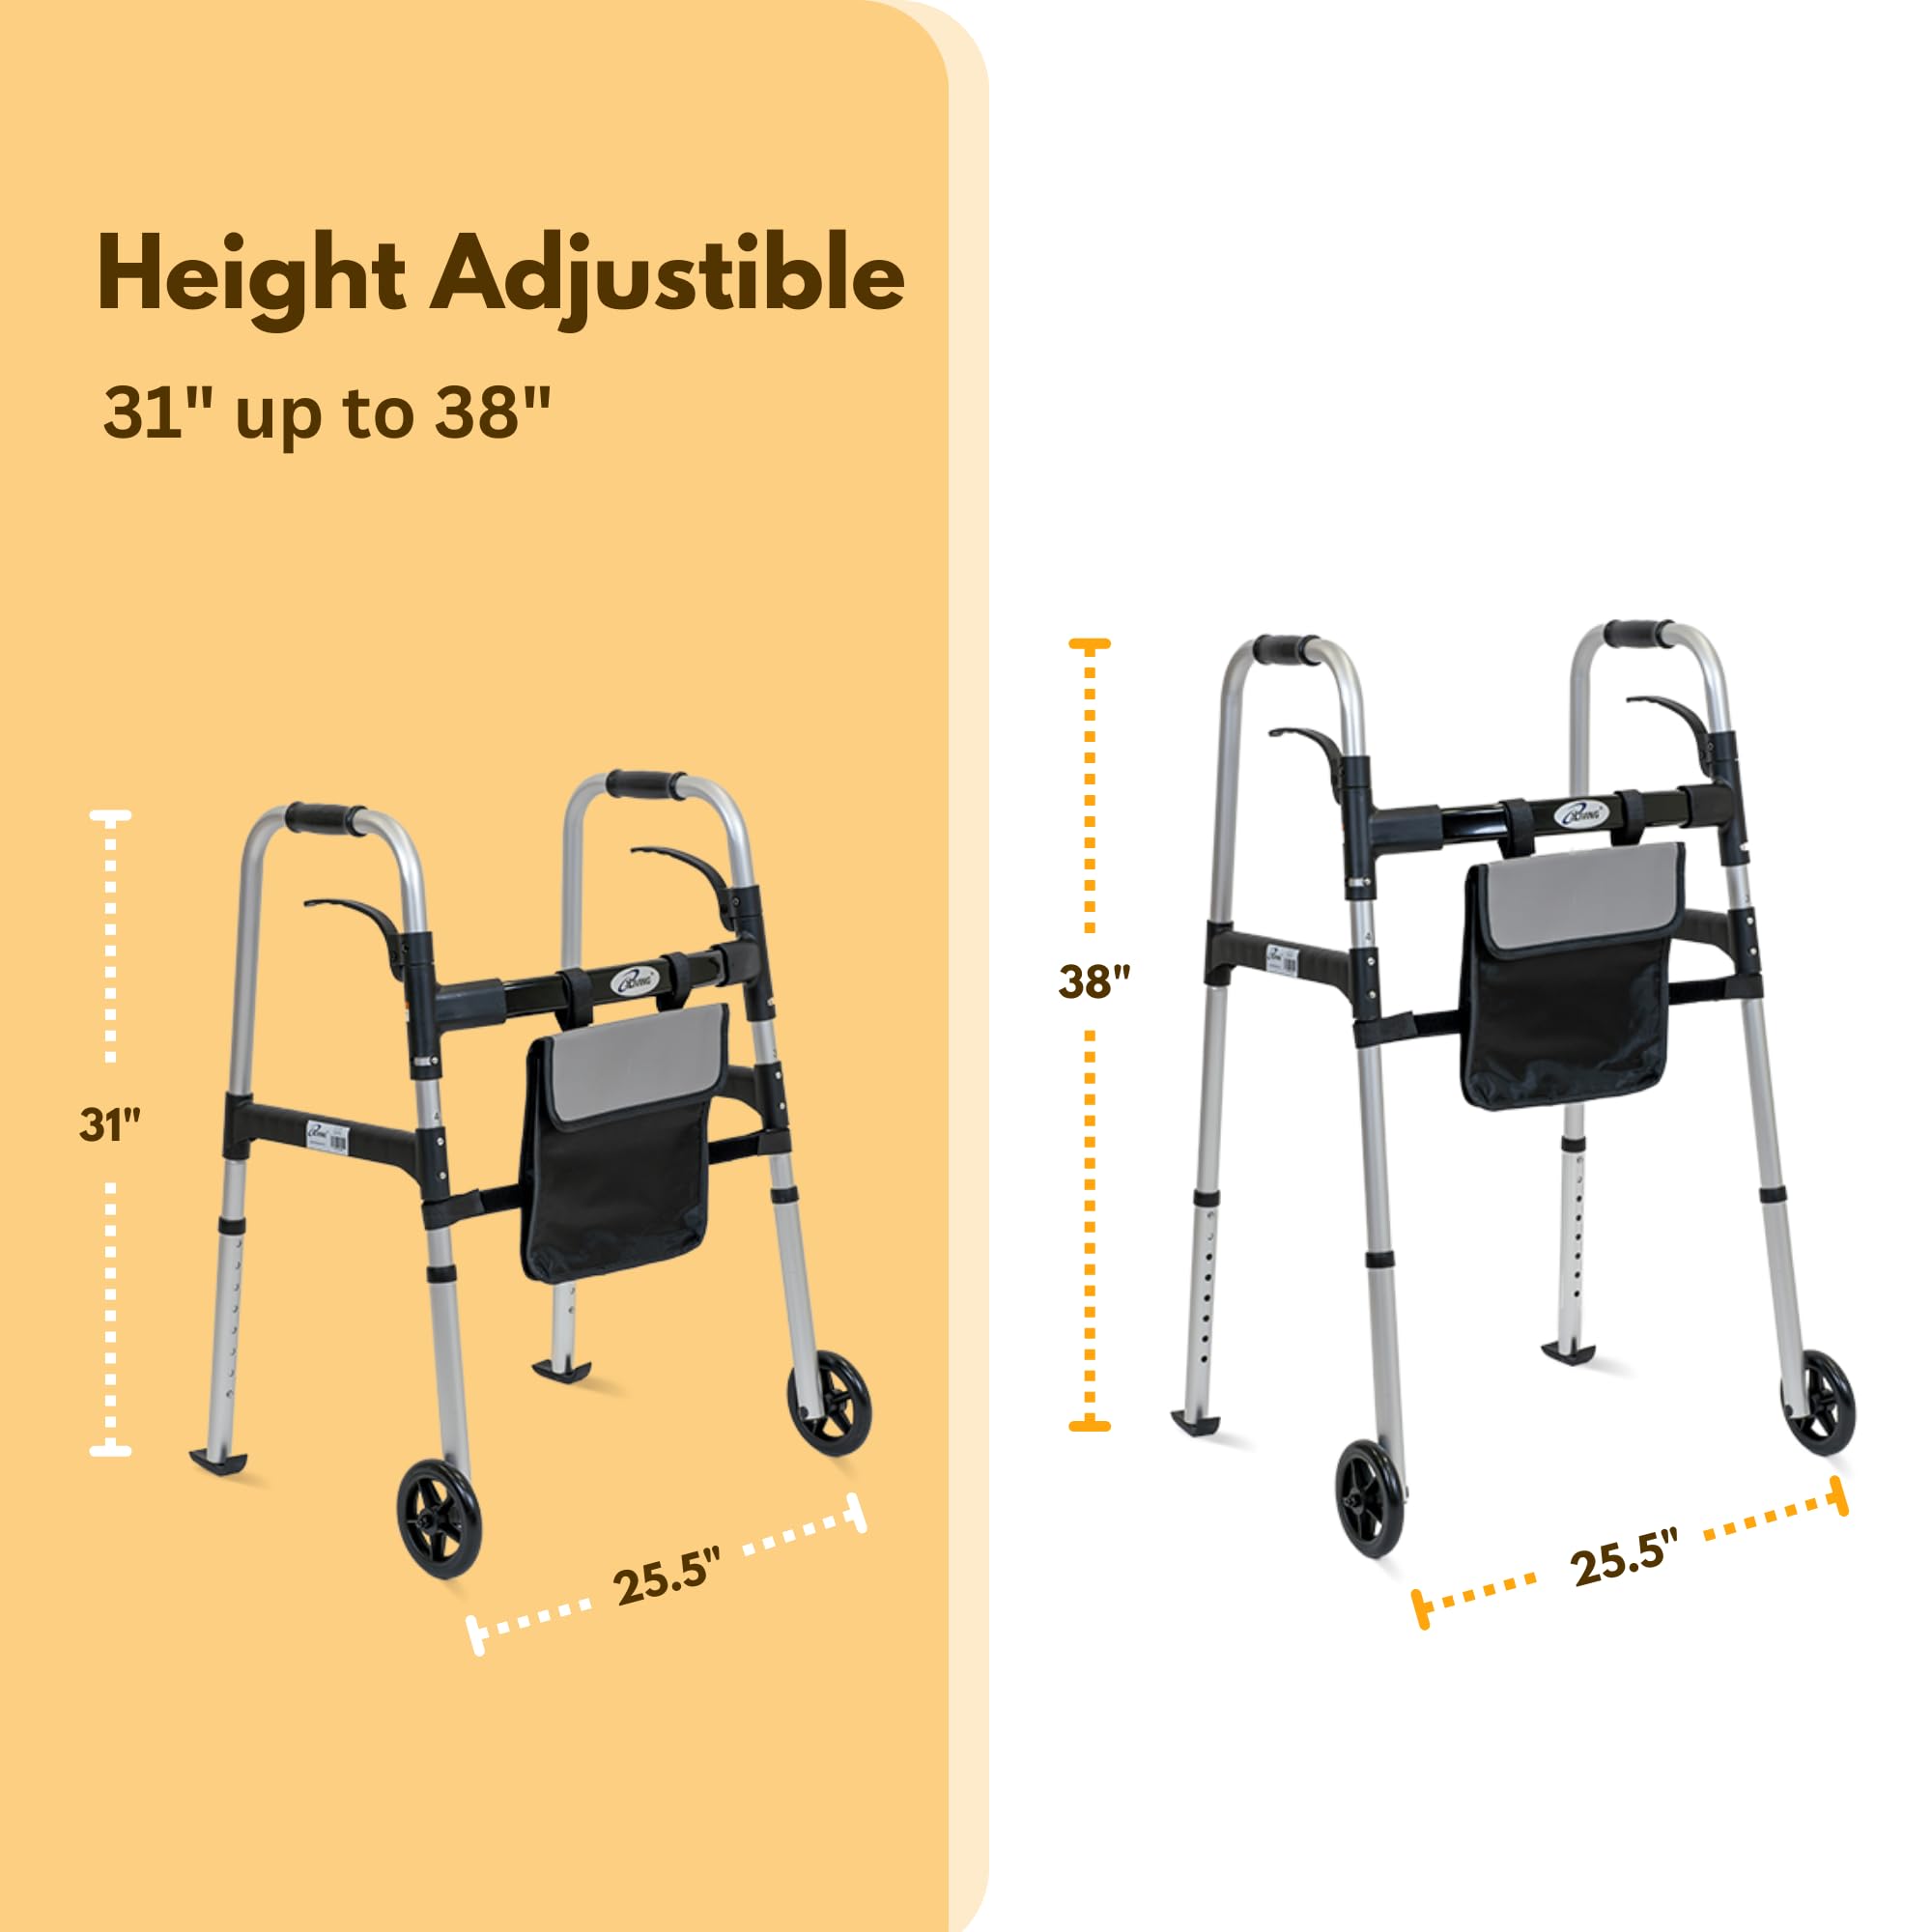 iLiving Easy Folding Rolling Walker with Shopping Bag Basket and Glide Skis - Upright Mobility Aid for Senior or Adults, Foldable and Adjustable Height Supports up to 350 lbs, Standard Walker, Silver